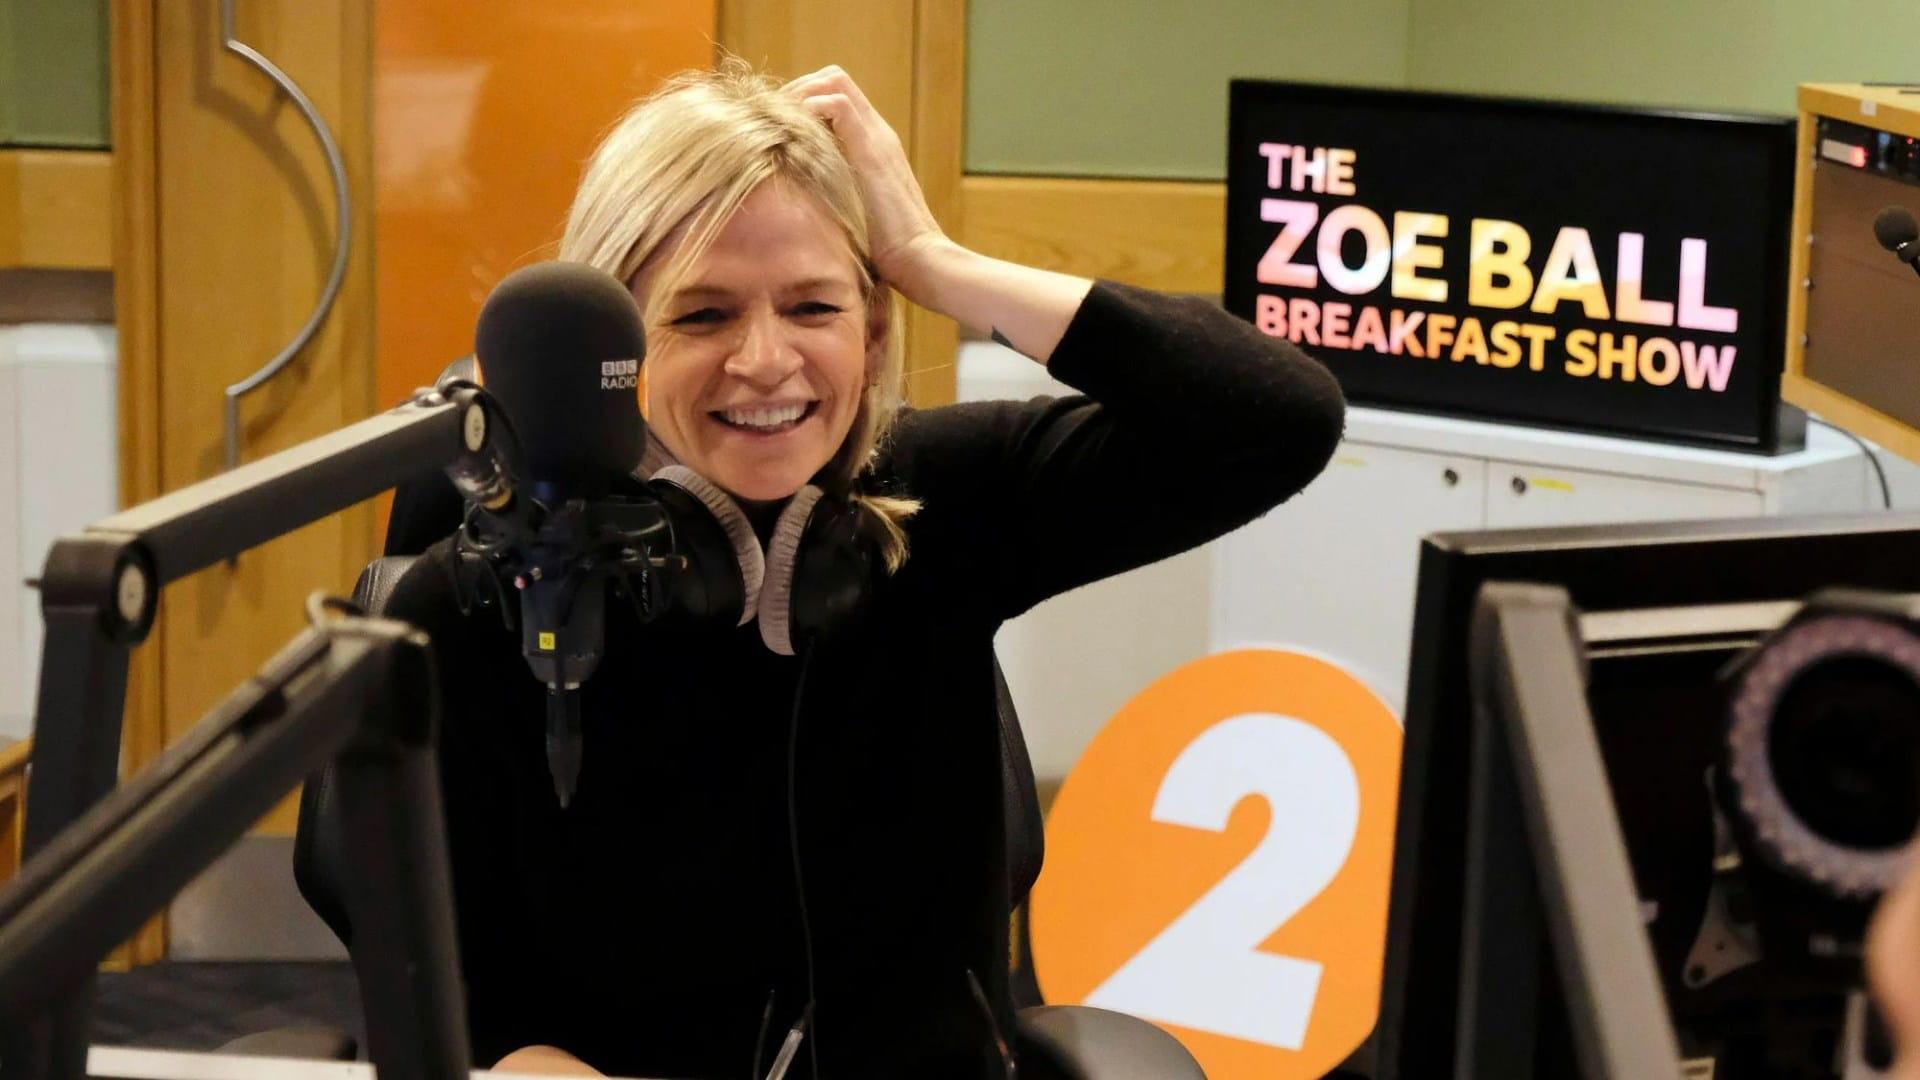 Zoe Ball to take time off Radio 2 after revealing devastating family news saying 'these are extremely tough times'